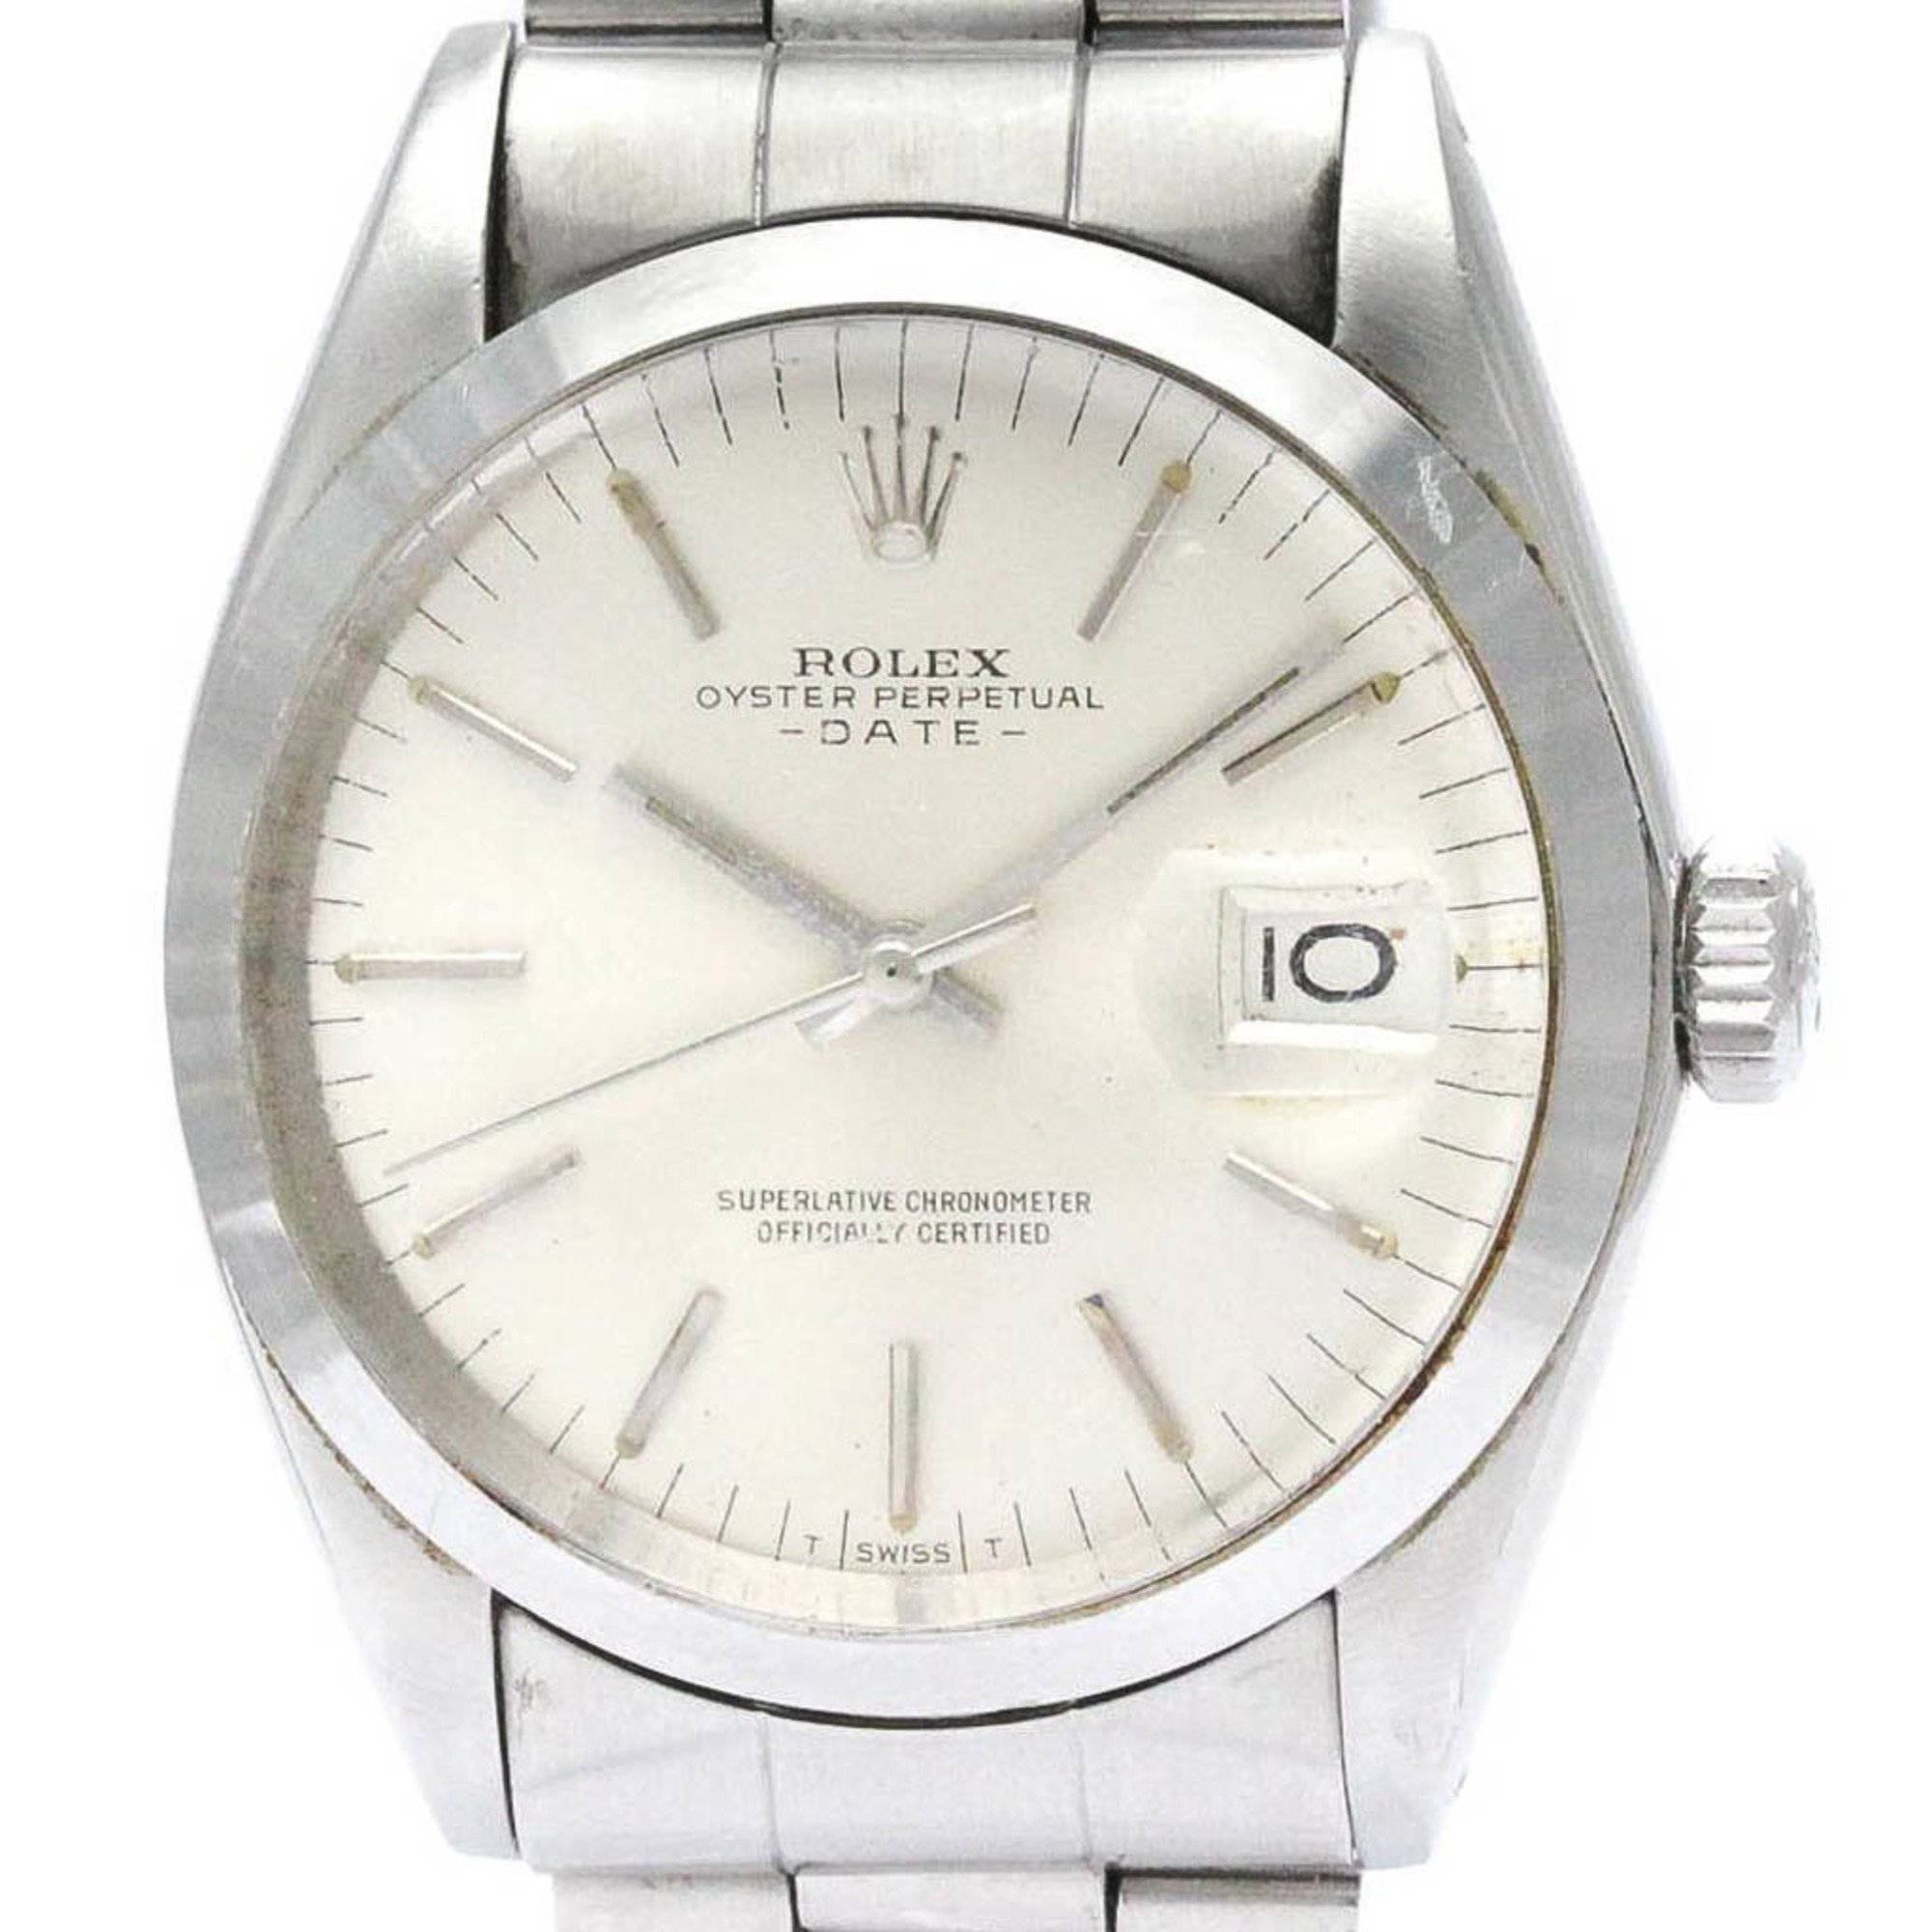 Vintage ROLEX Oyster Perpetual Date 1500 Steel Automatic Mens Watch BF565466